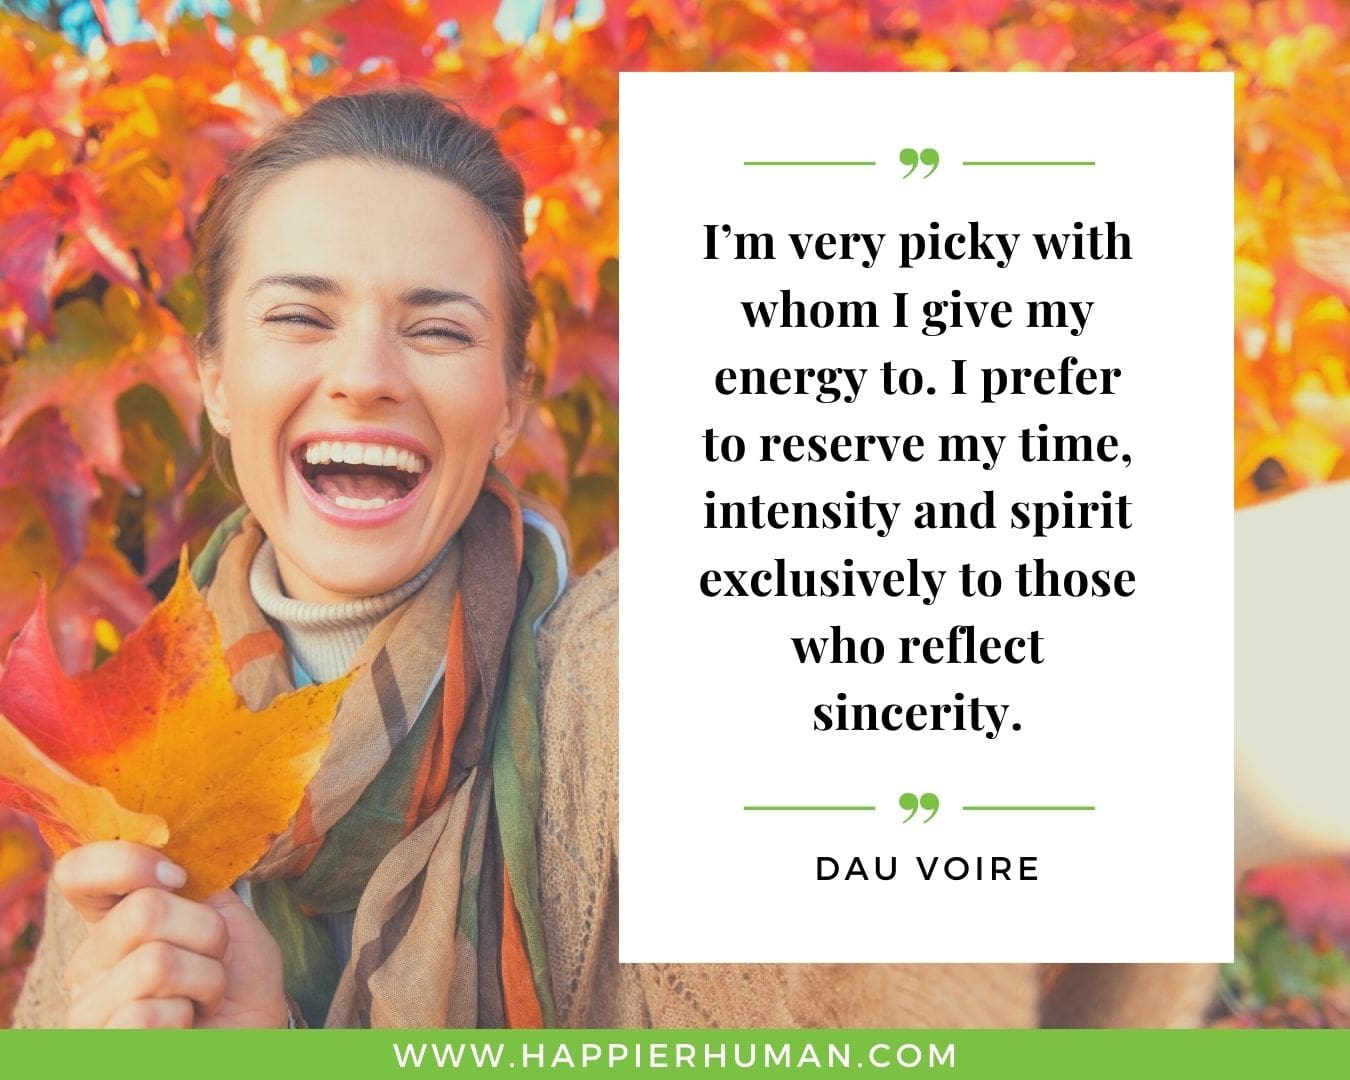 Introvert Quotes - “I’m very picky with whom I give my energy to. I prefer to reserve my time, intensity and spirit exclusively to those who reflect sincerity.” – Dau Voire